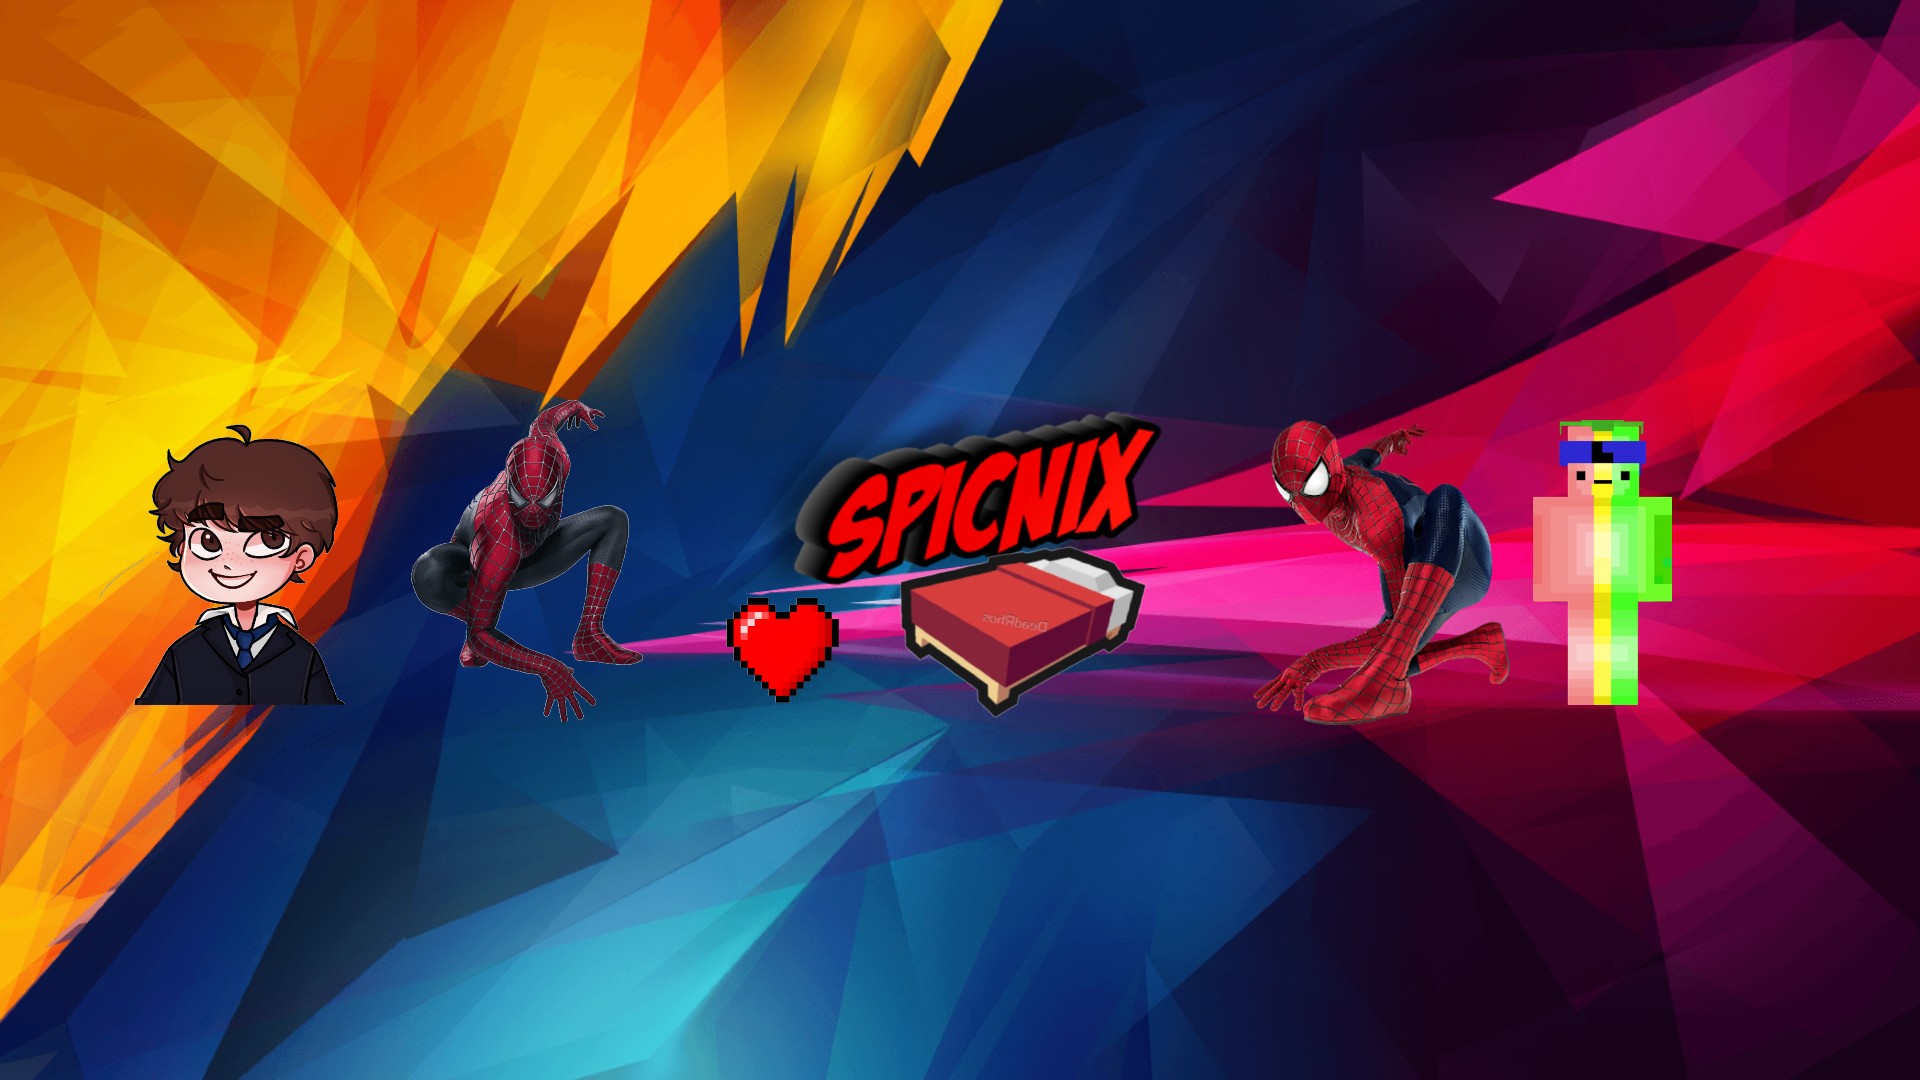 SPICNIX's Profile Picture on PvPRP